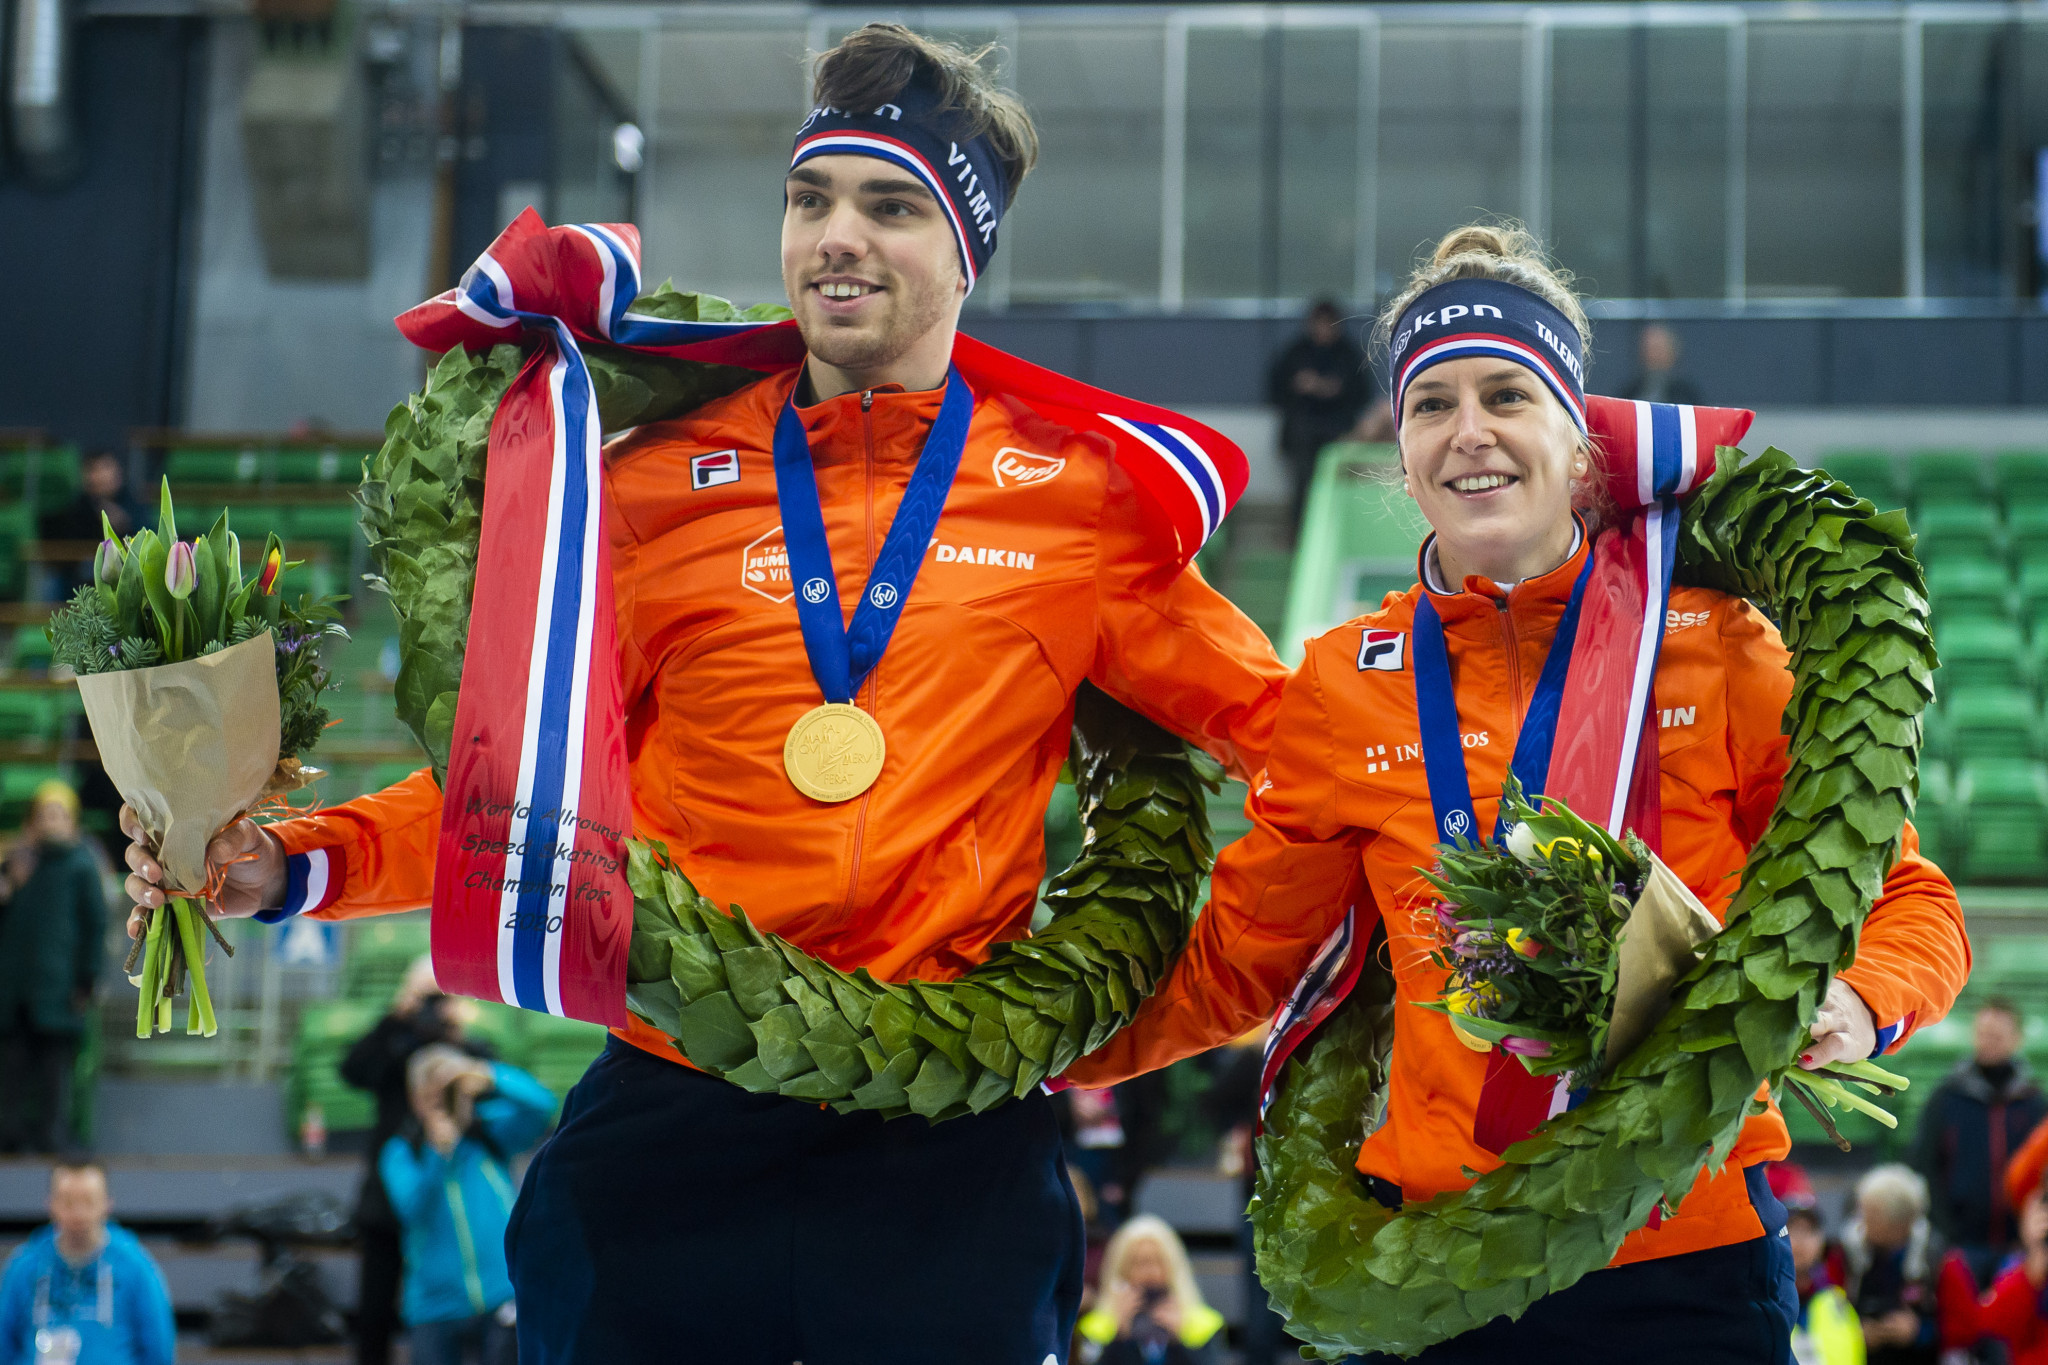 Roest and Wüst crowned World Allround Speed Skating champions again in Hamar